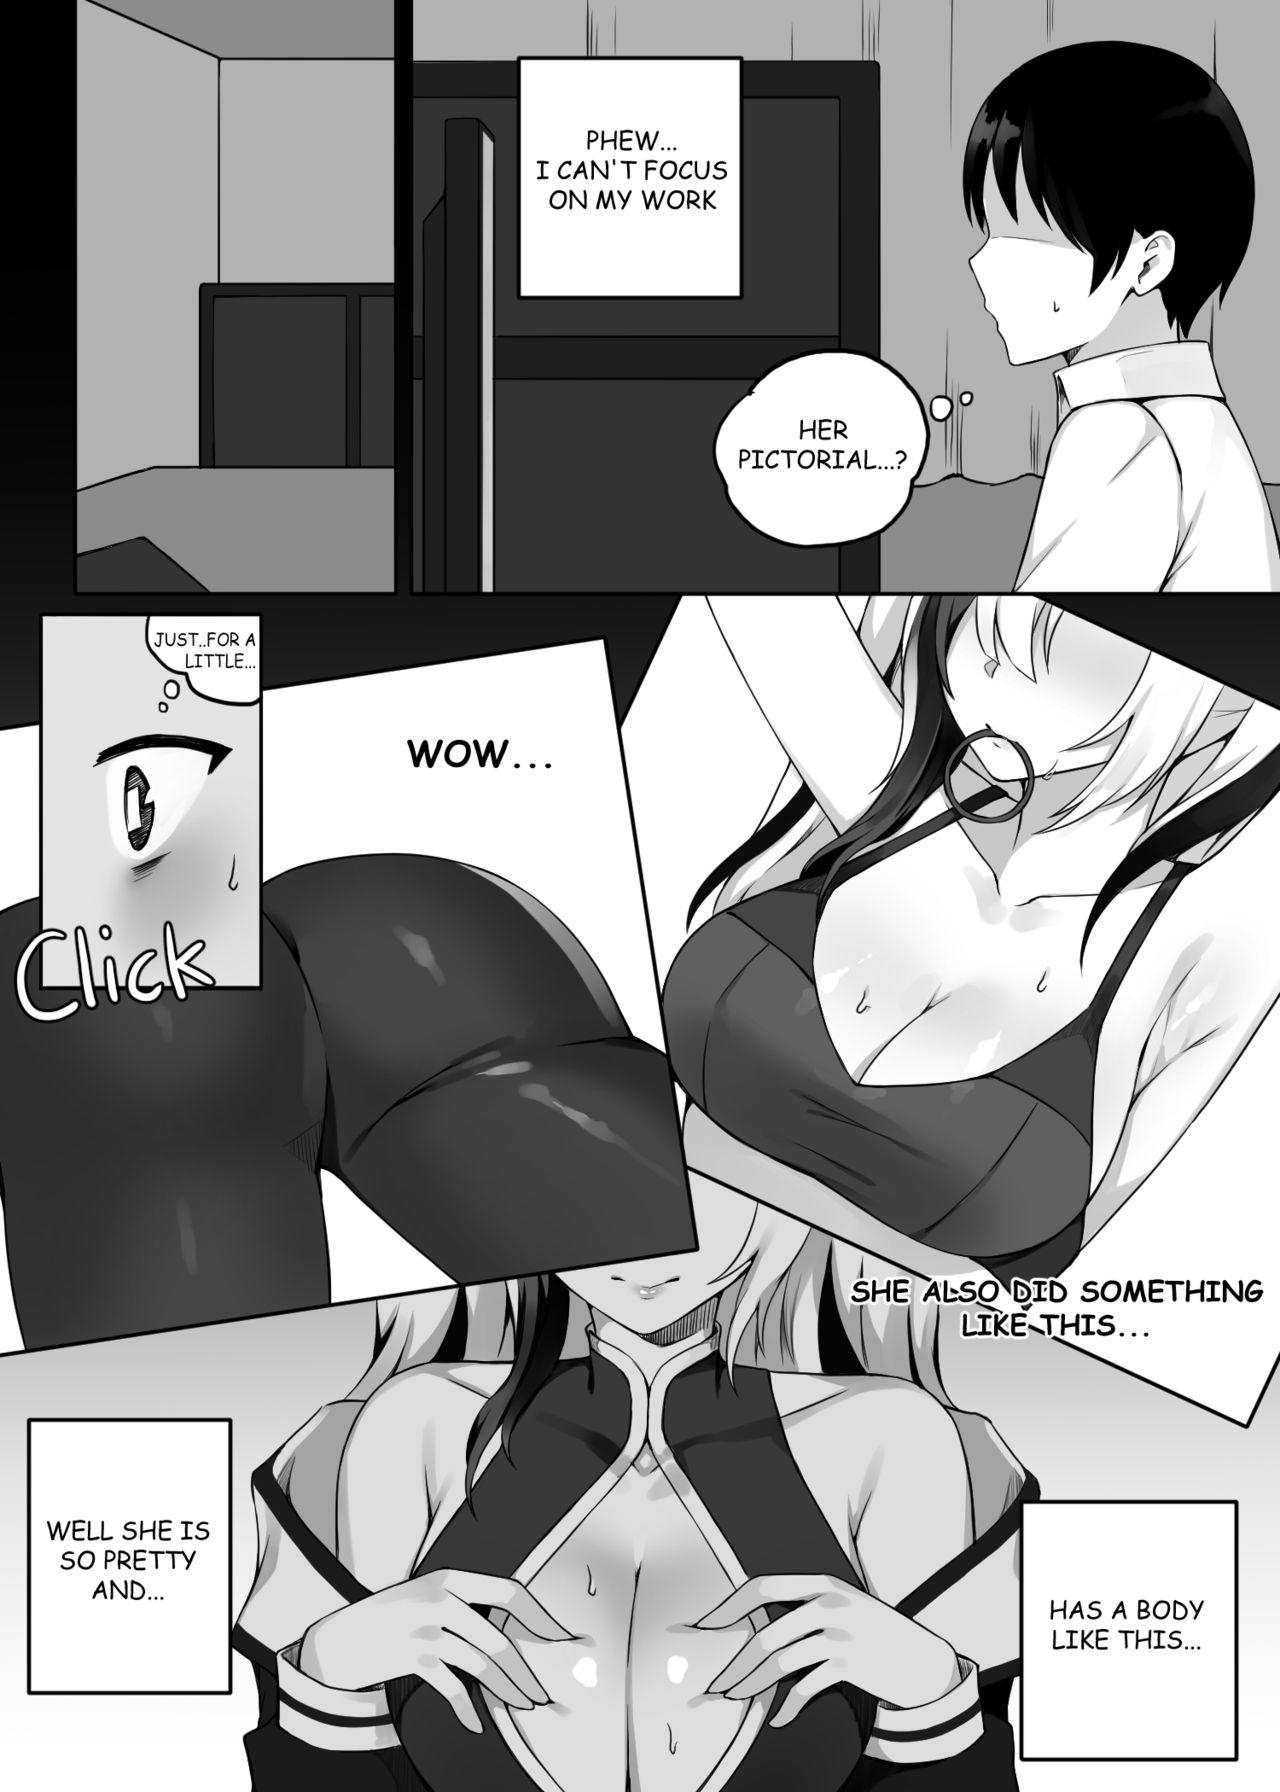 Hunk FEater's fan service♥ - Arknights Blow Job Contest - Page 4